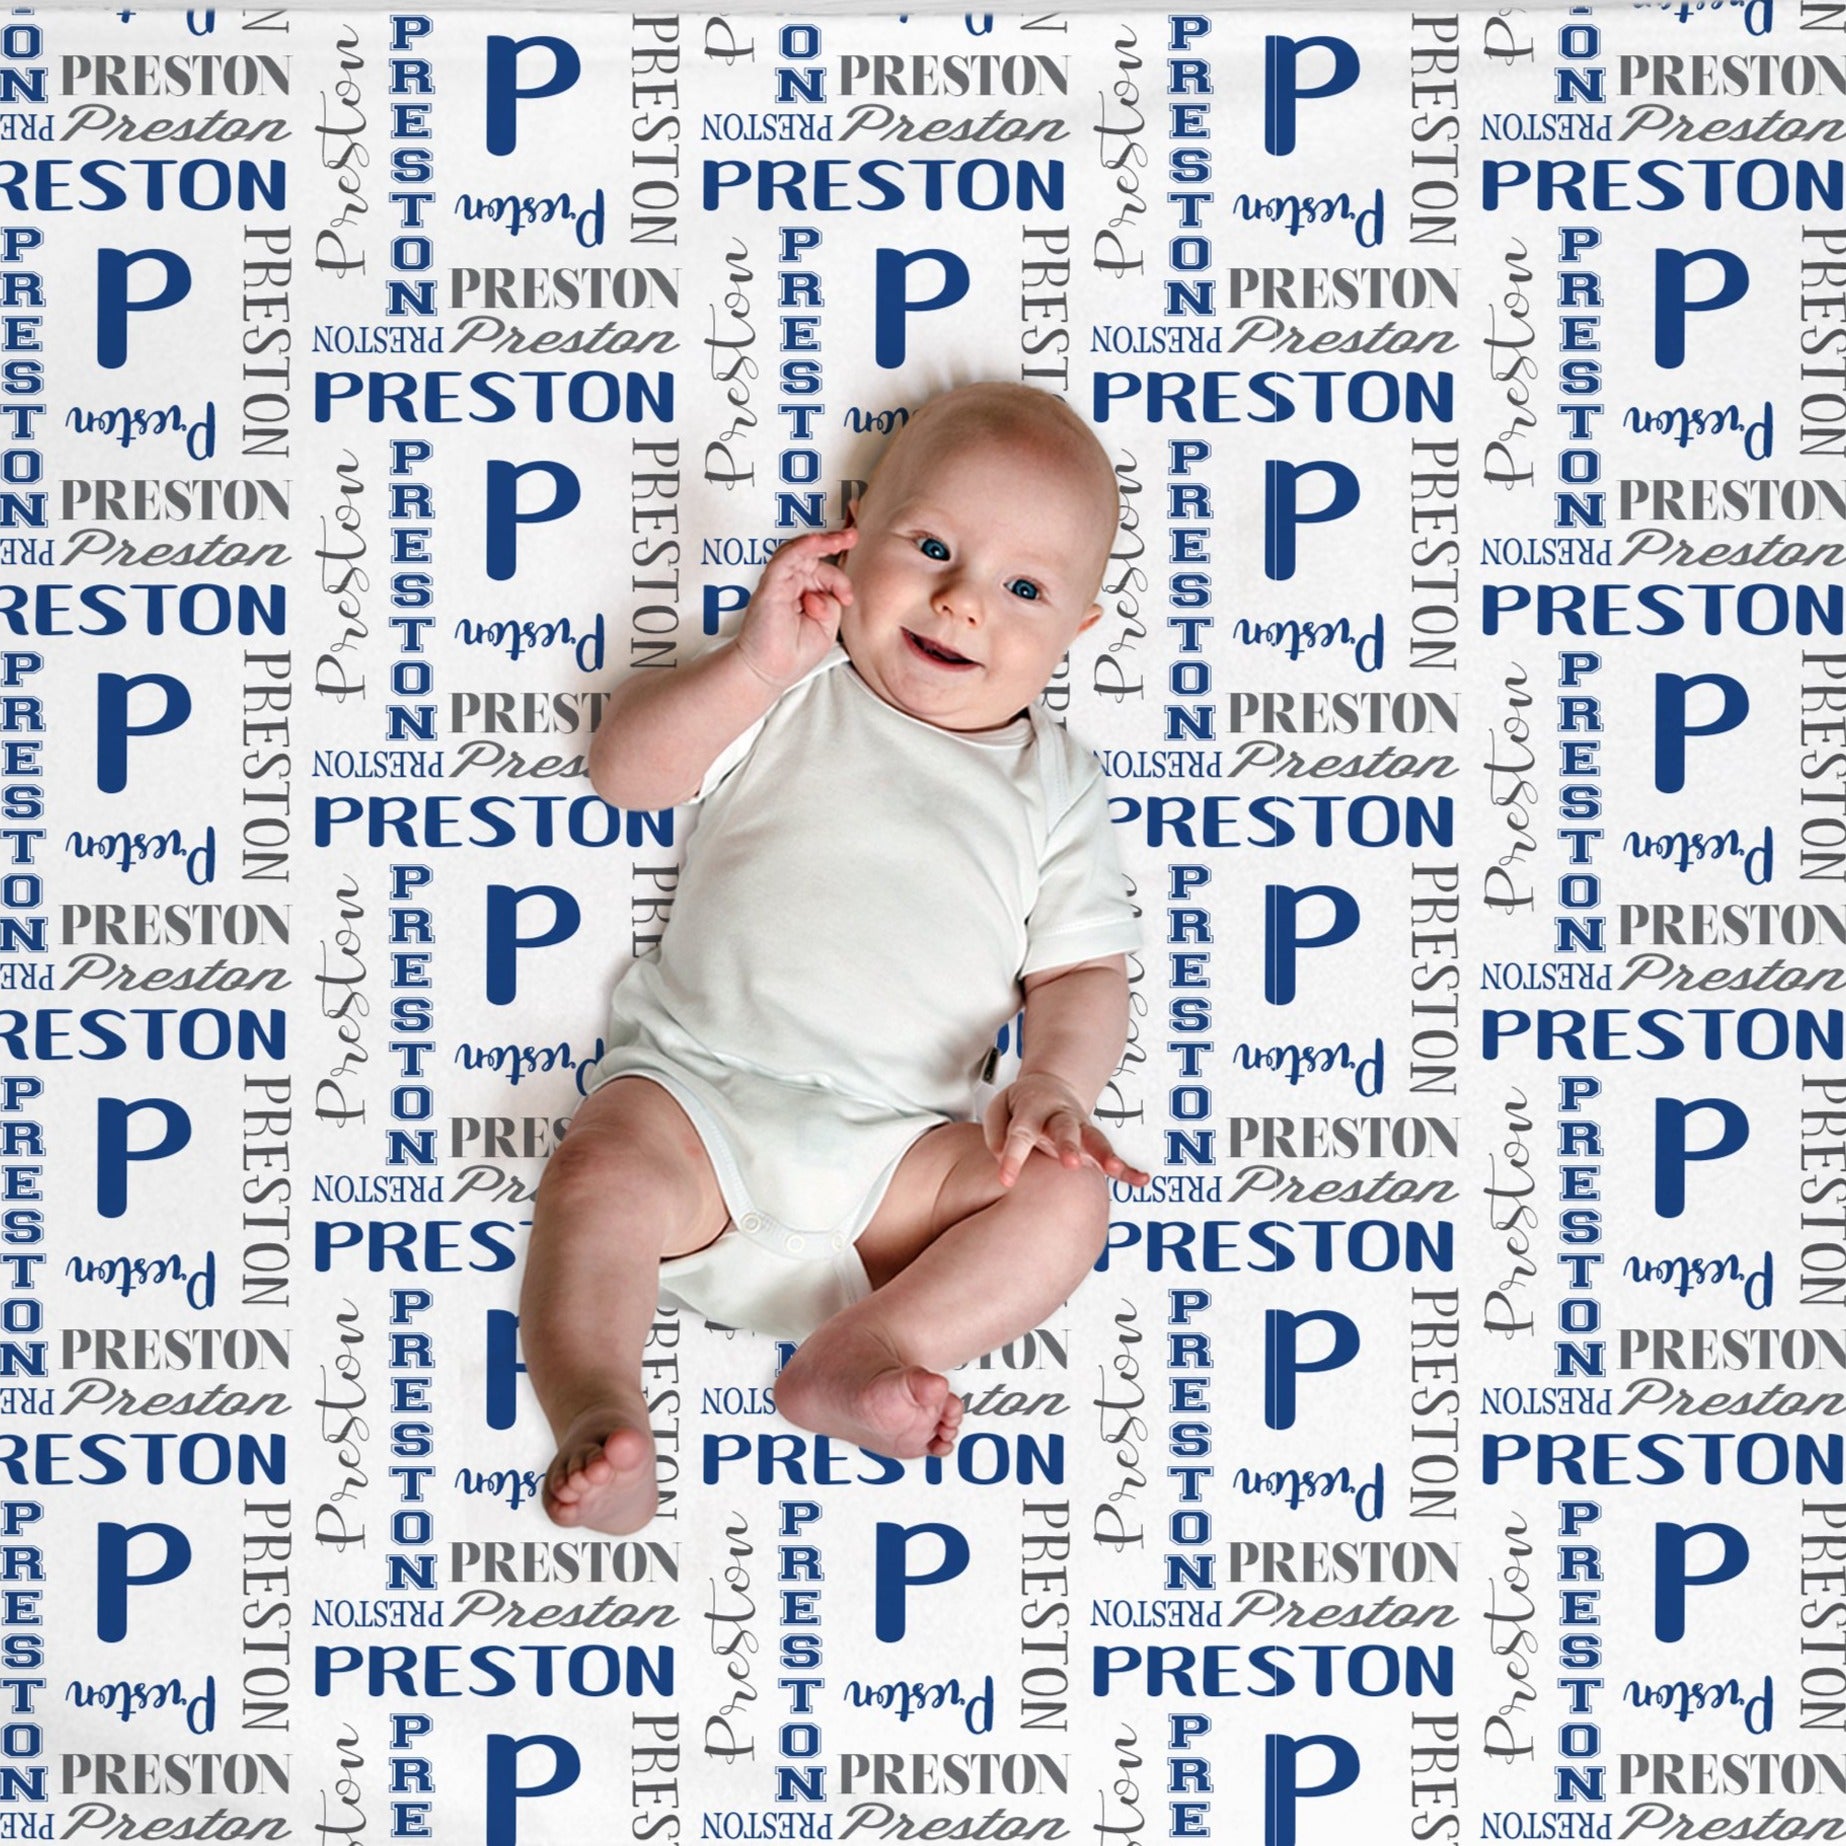 Preston Name and Initial Personalized blanket, pick your own color scheme